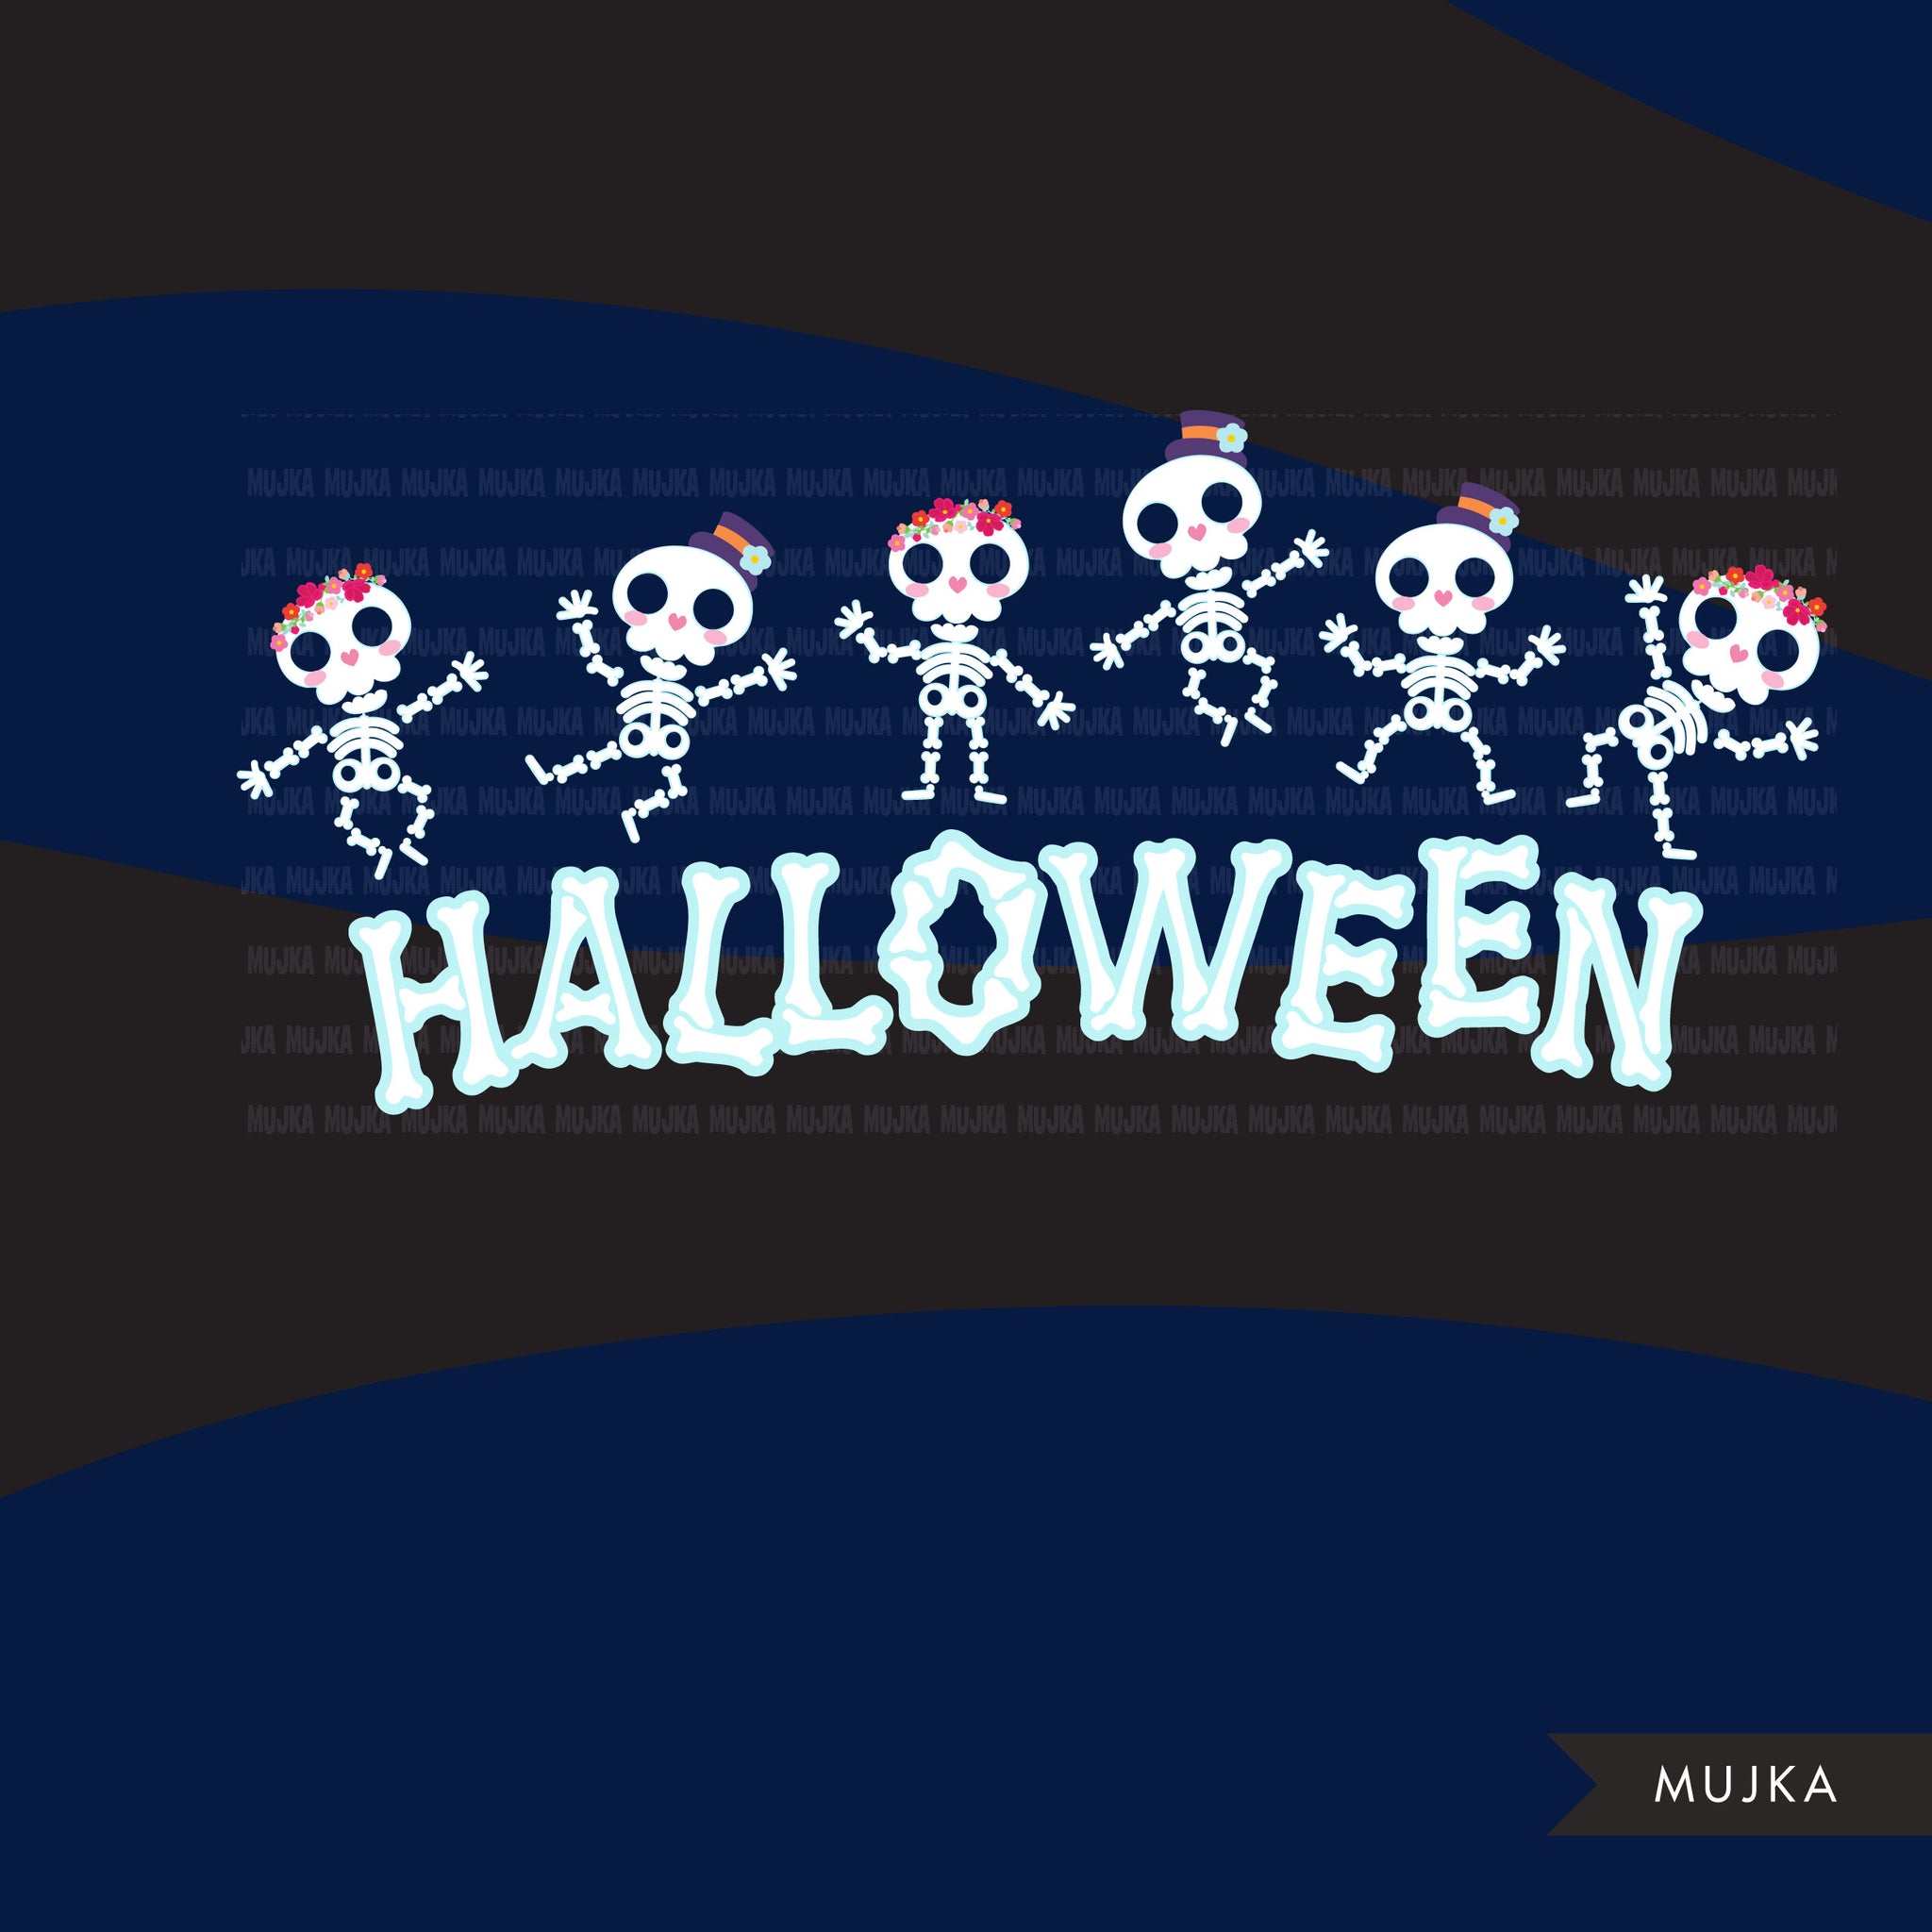 Cute Halloween clipart, cute to the bone, halloween sublimation designs, sugar skull png, skeleton shirt, skeleton clipart, cute bones